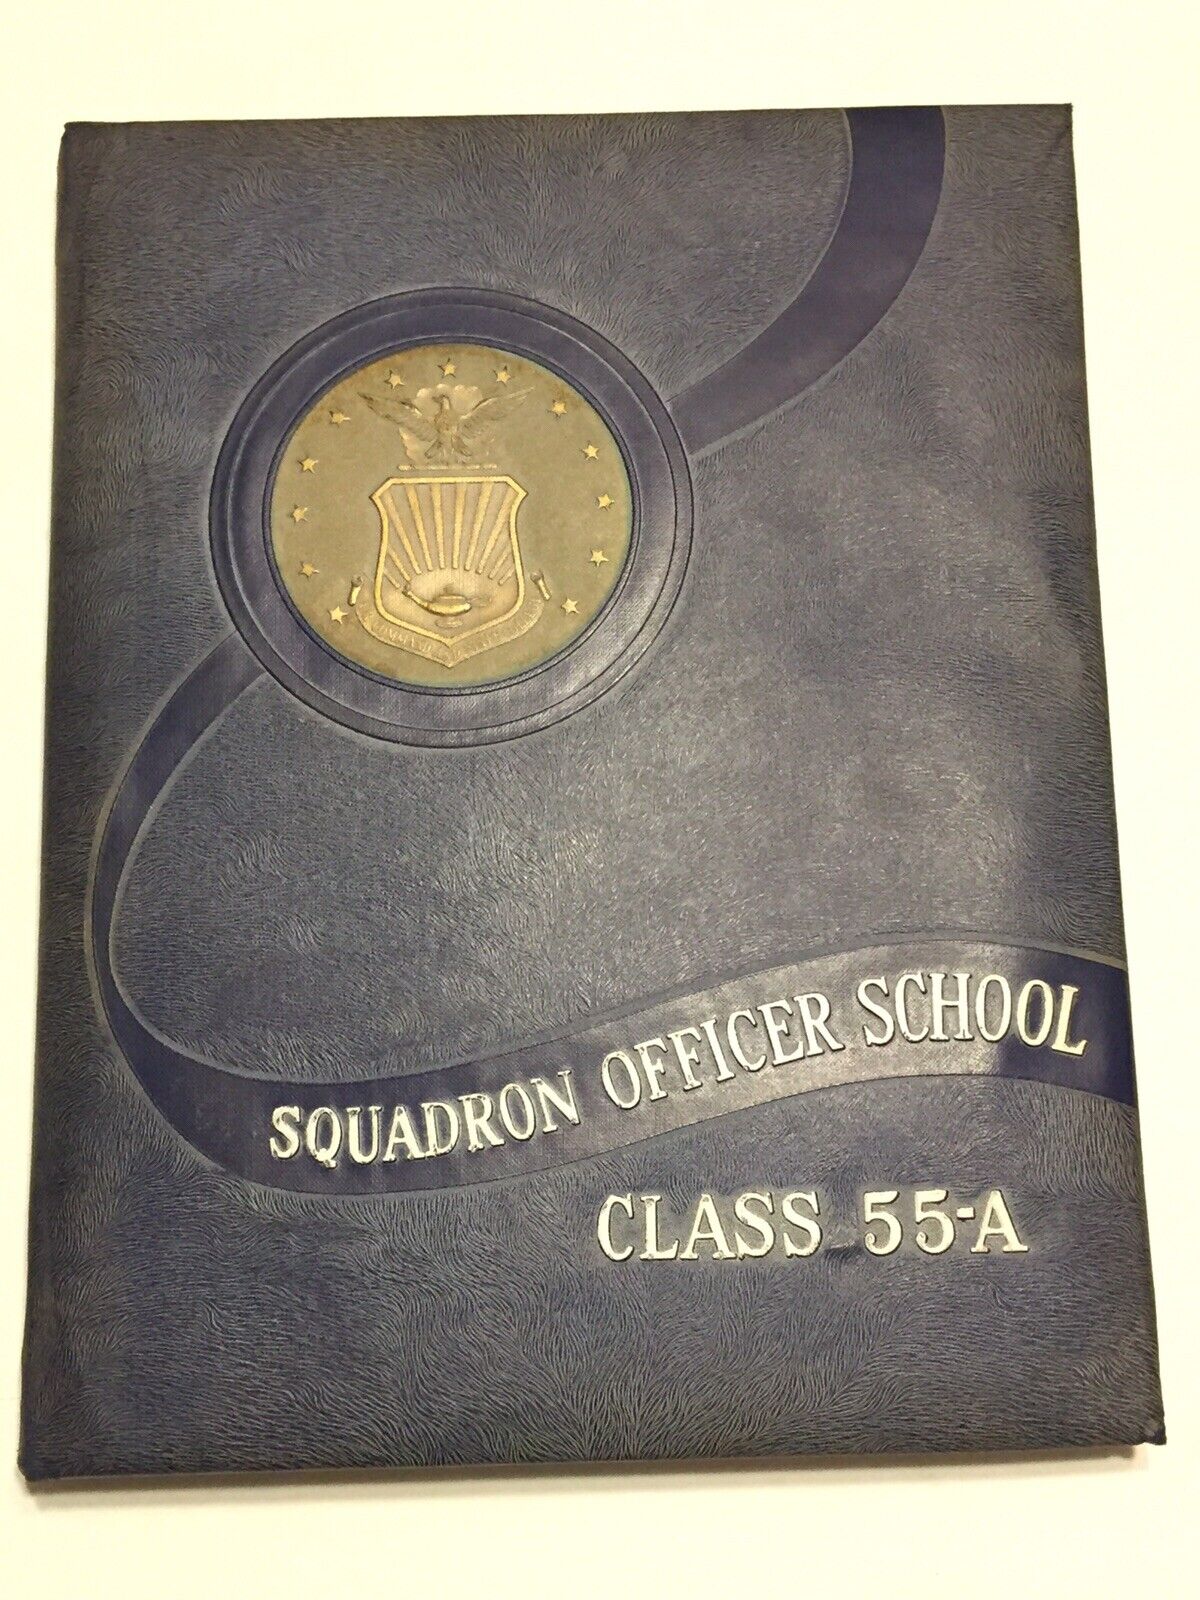 1955 Squadron Officer School Class 55-A